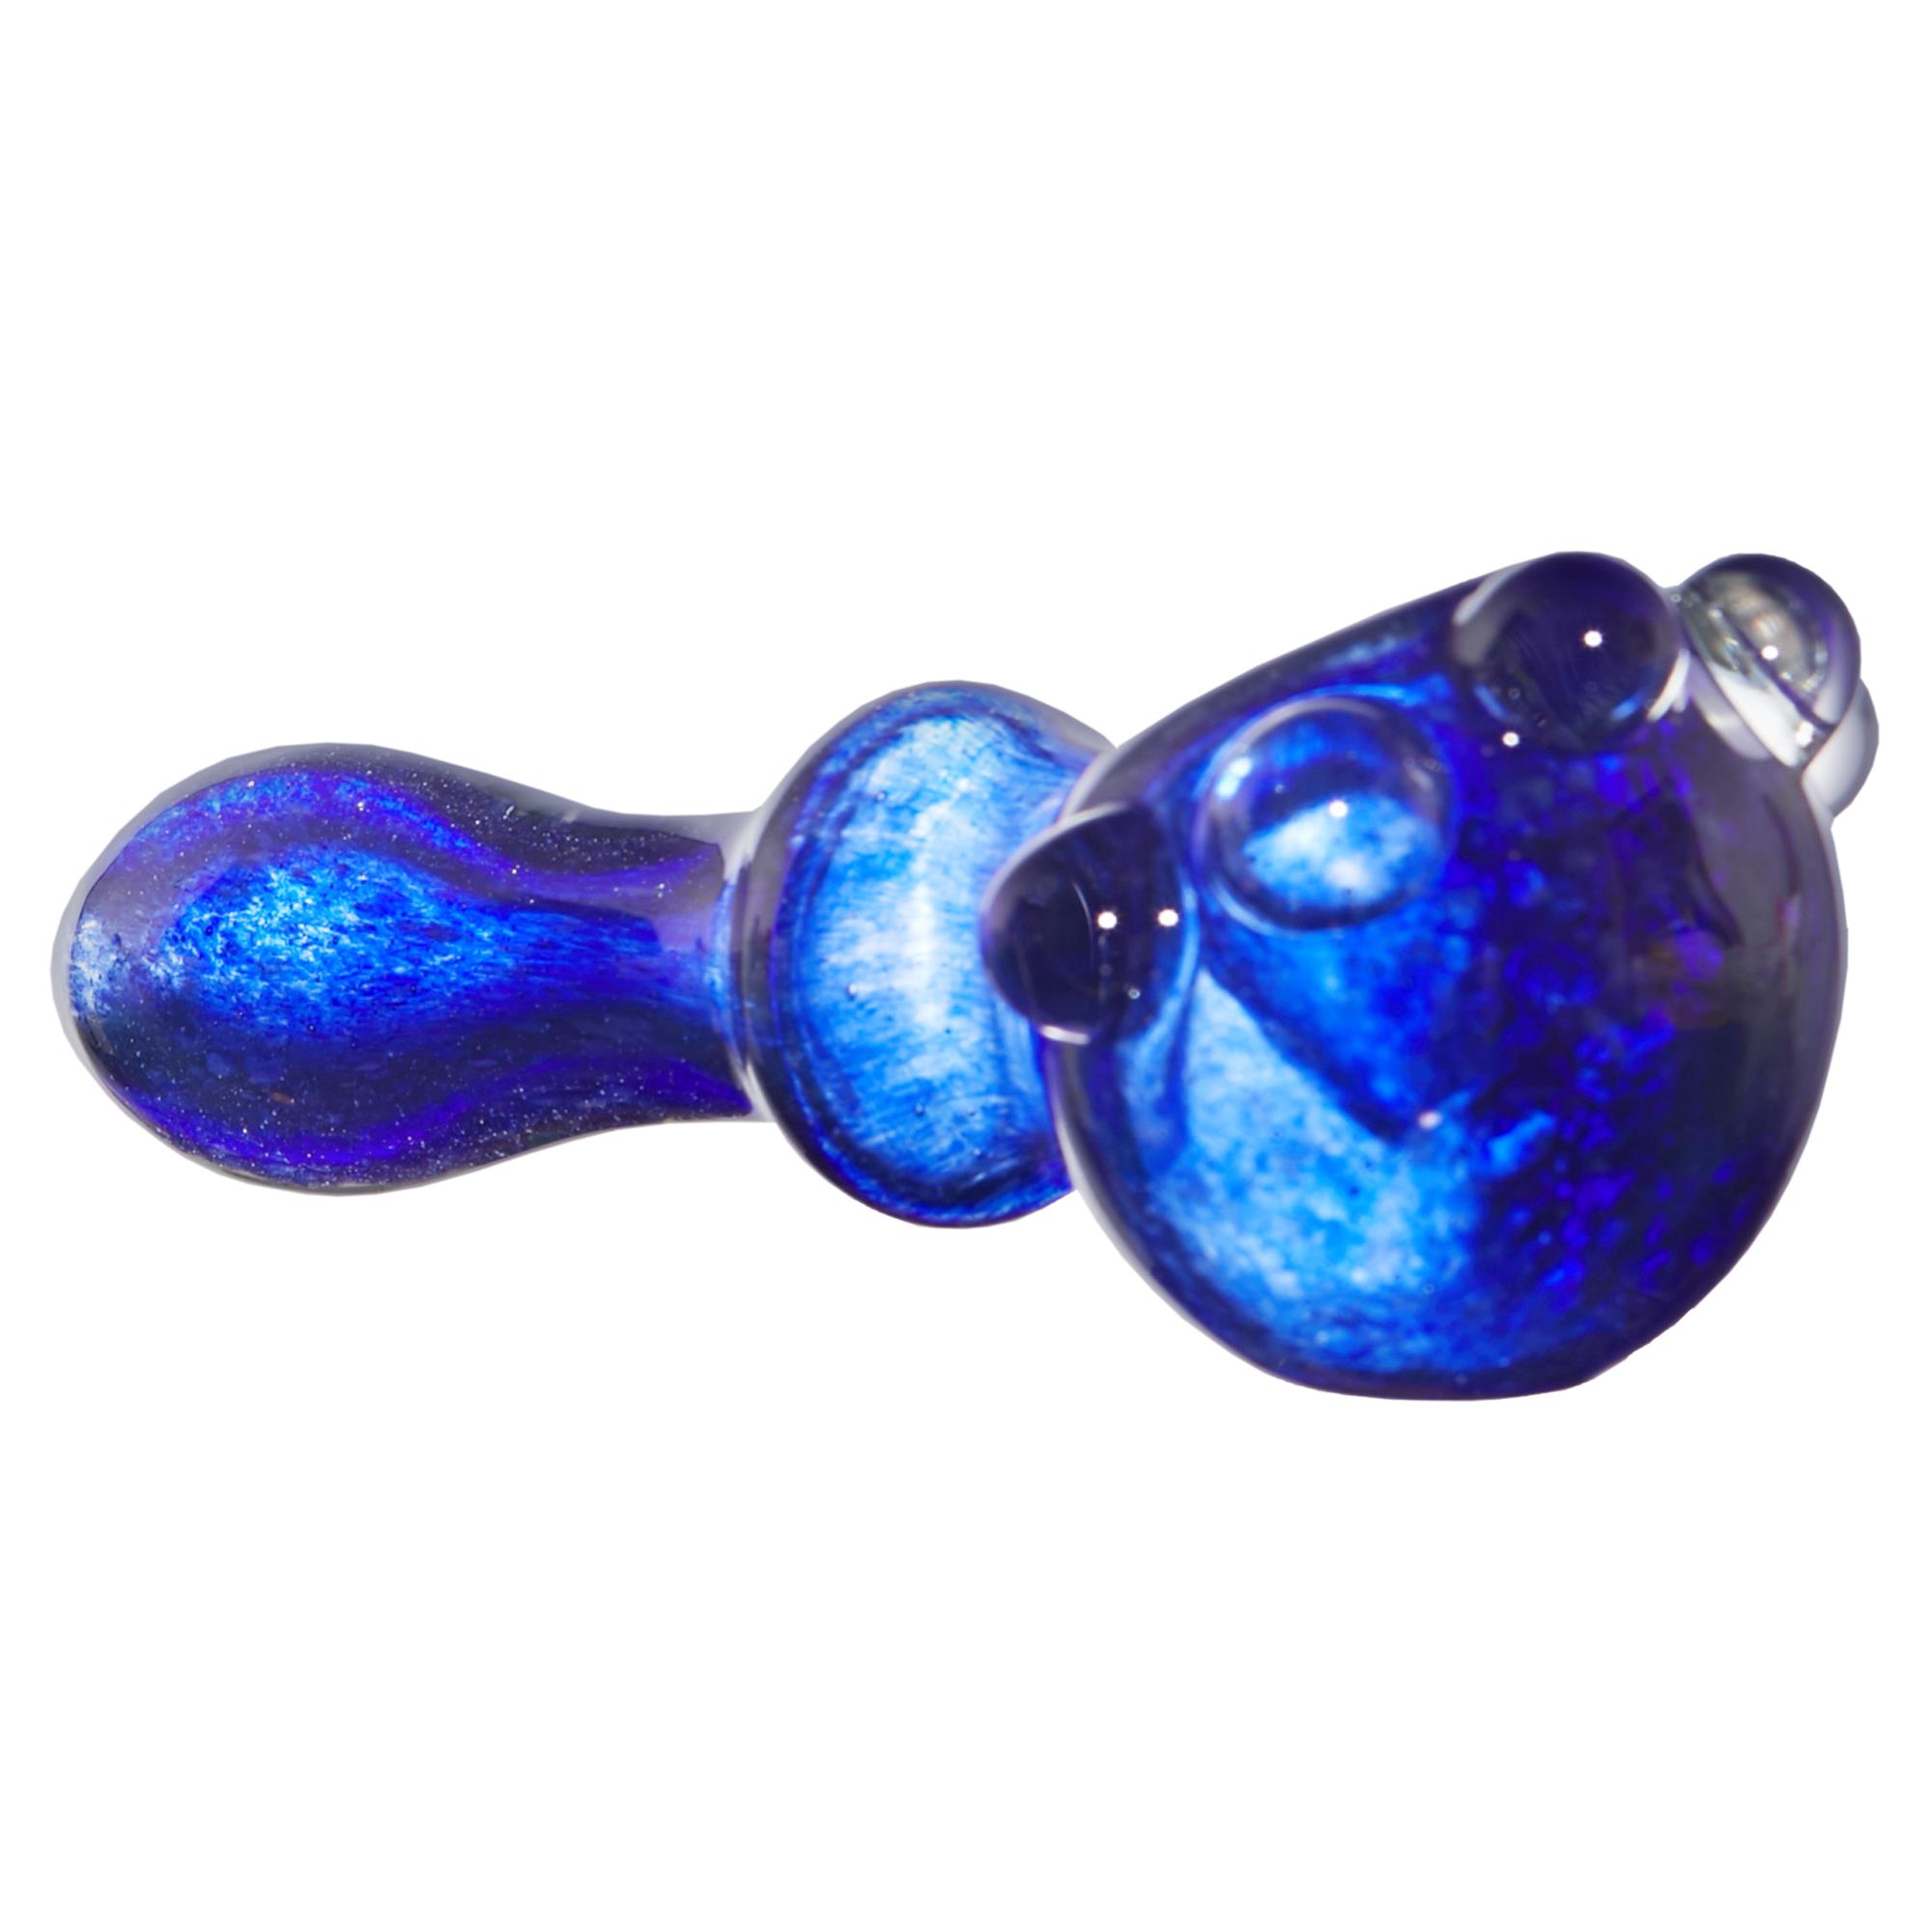 ALLEY CAT SPOON PIPE